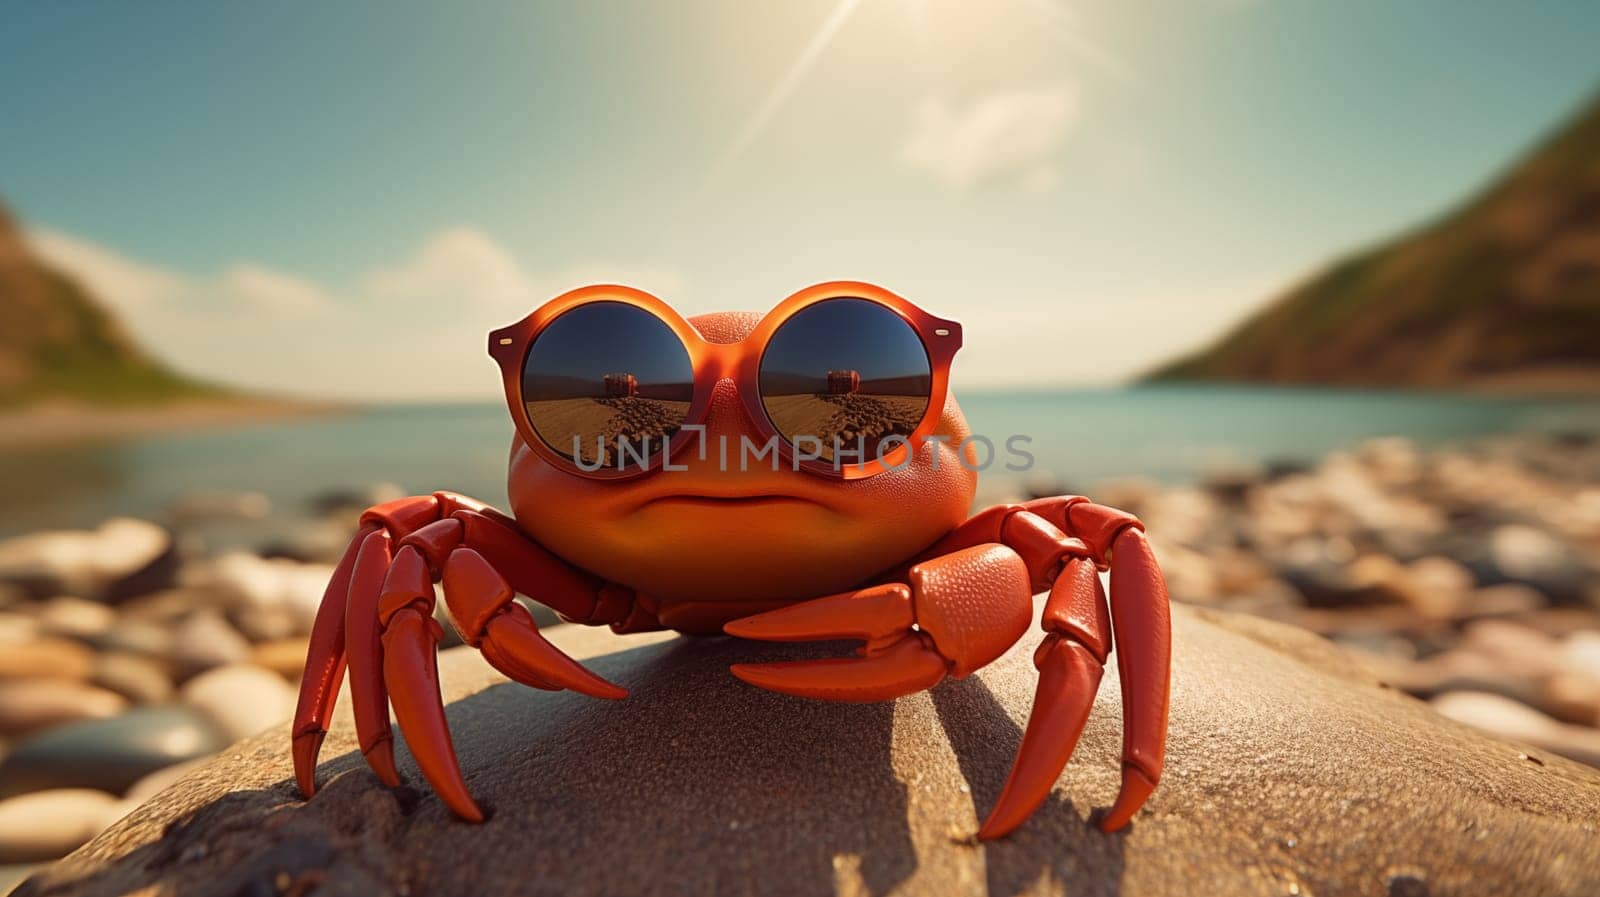 A whimsical crab donning sunglasses, basking on a pebbly beach